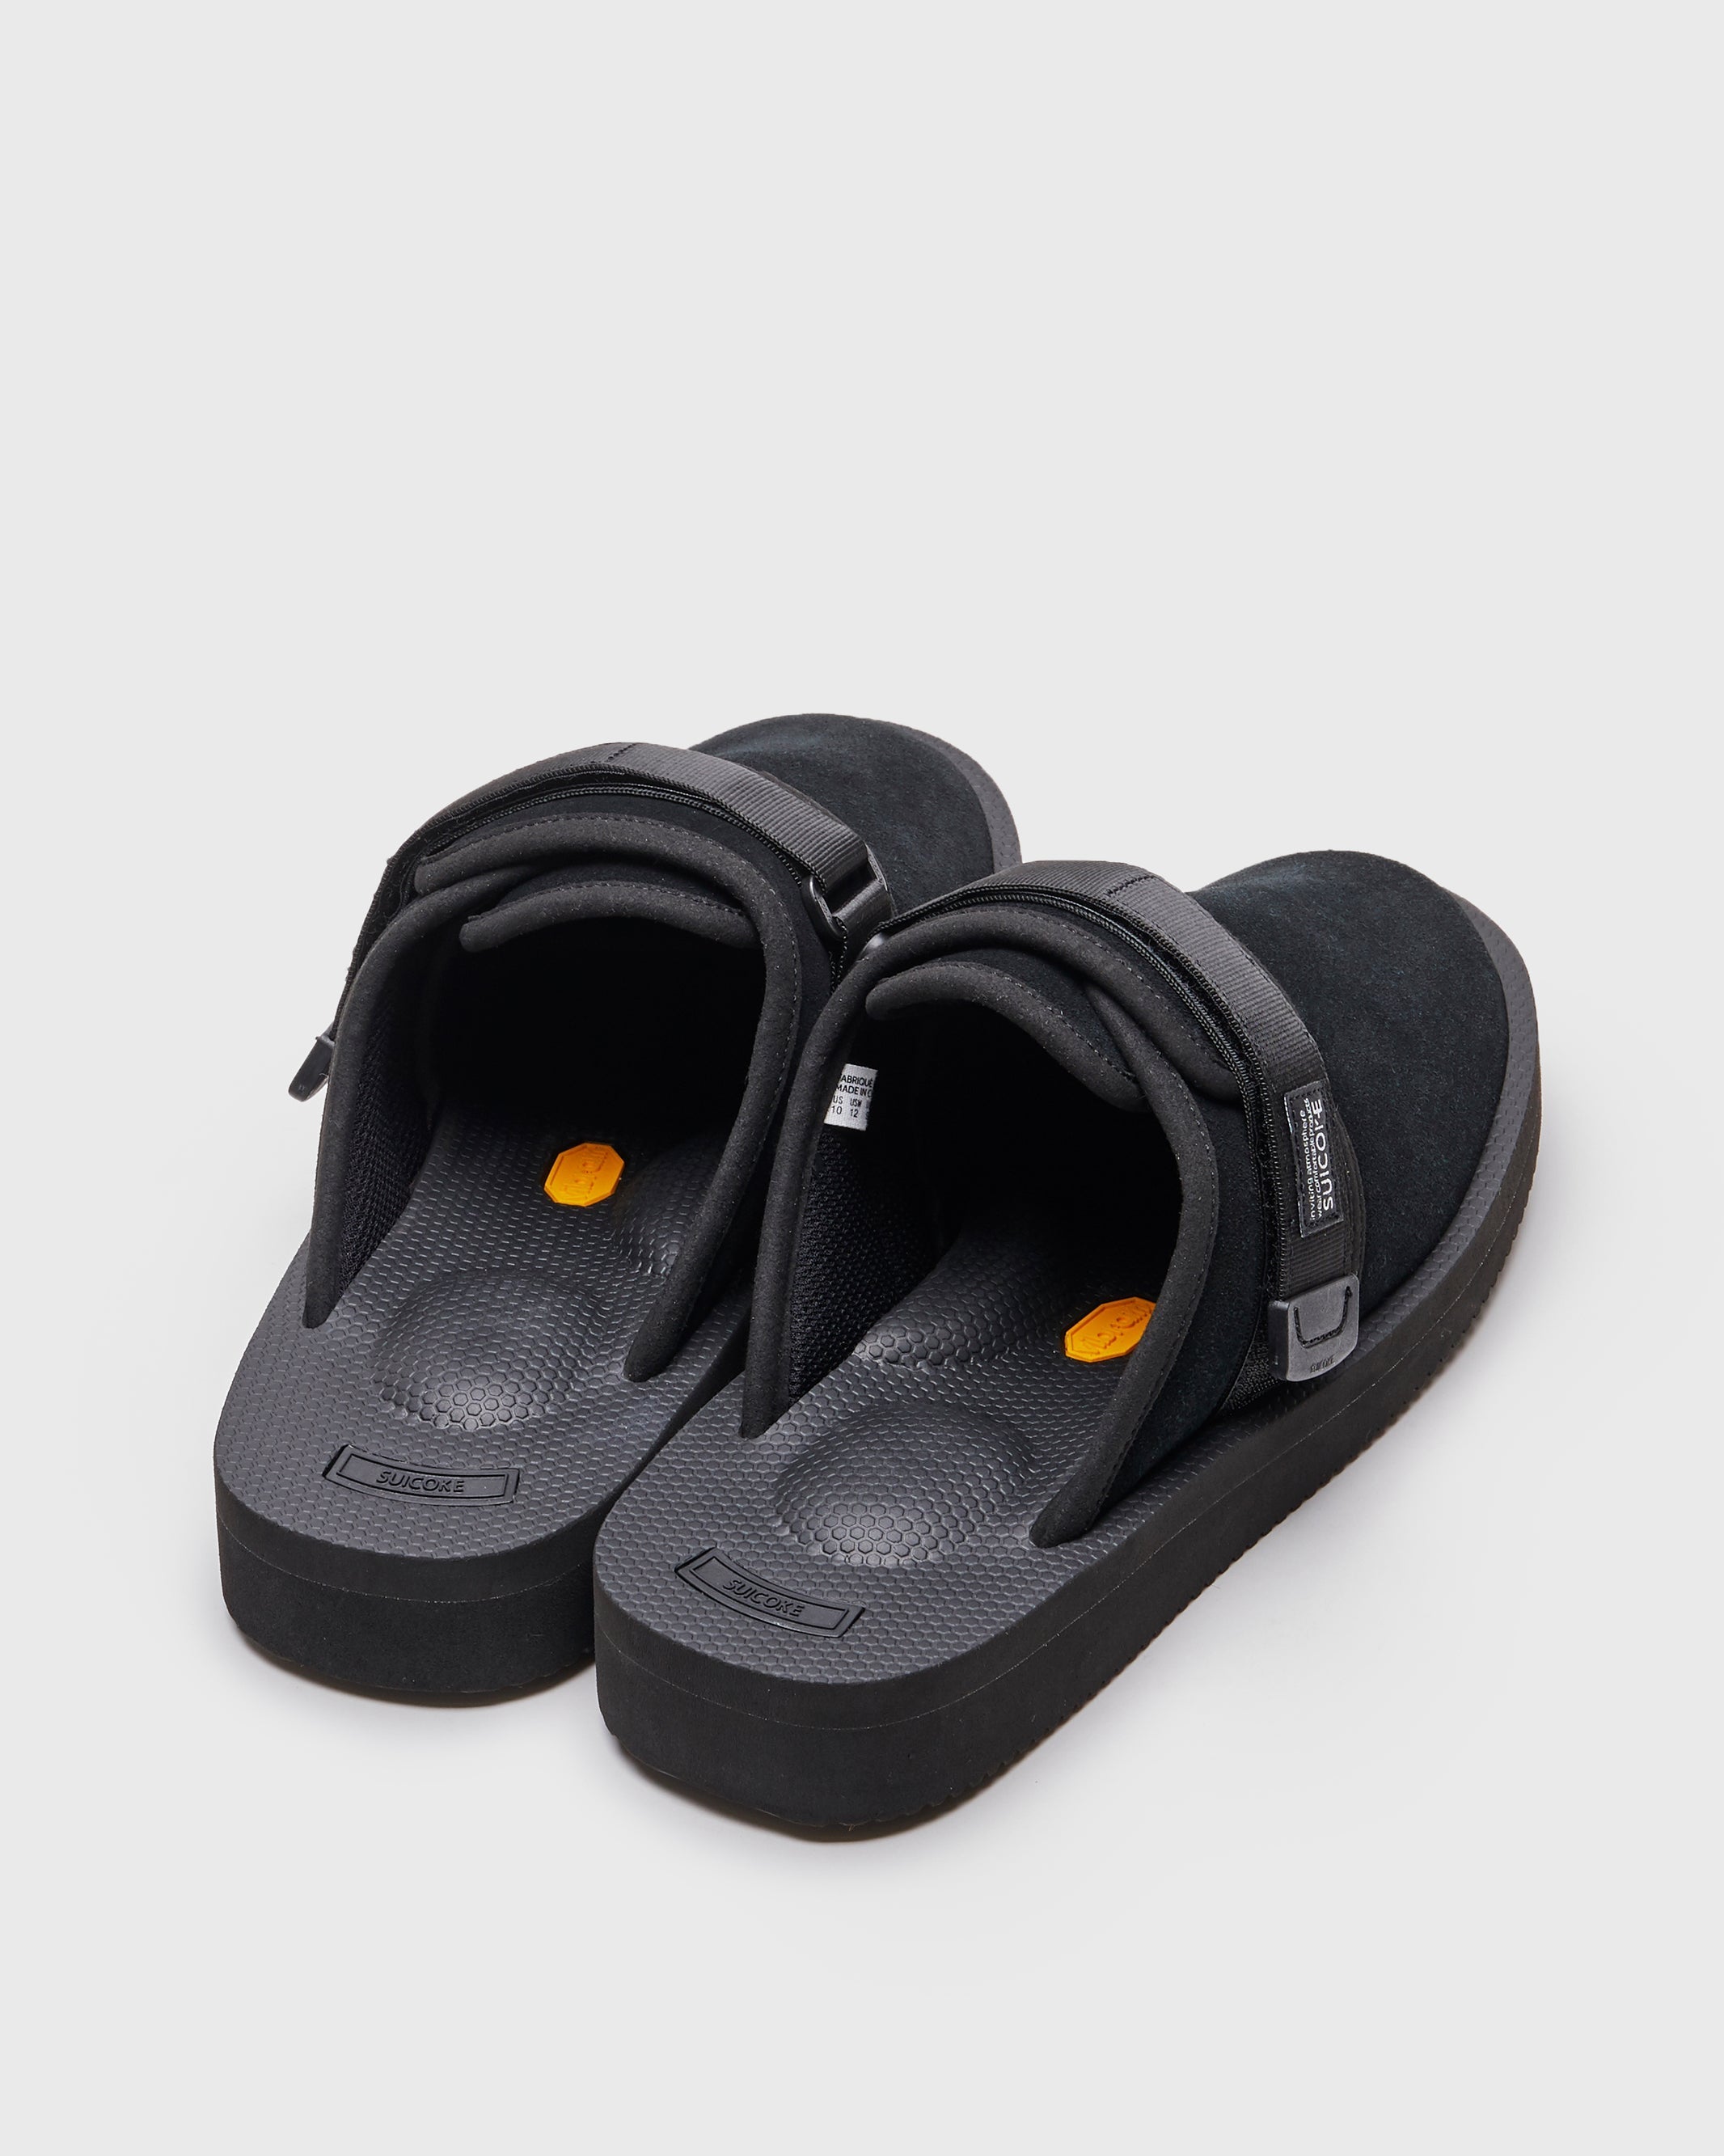 SUICOKE ZAVO-VS in Black OG-072VS | Shop from eightywingold an official brand partner for SUICOKE Canada and US.